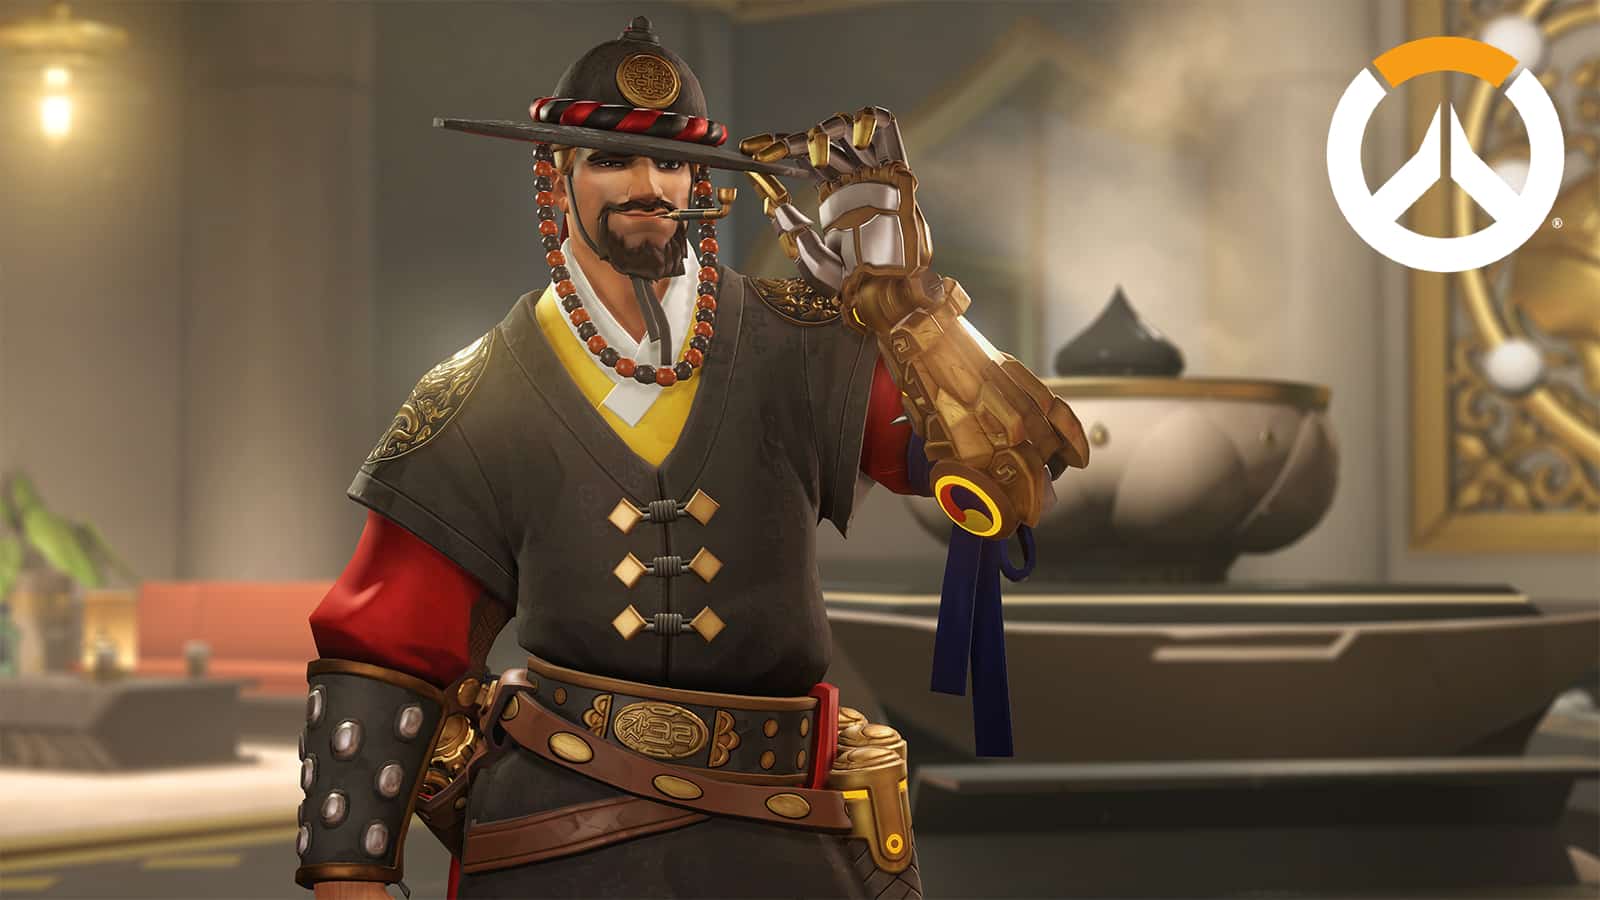 Overwatch cowboy tips his hat in an Asian inspired outfit